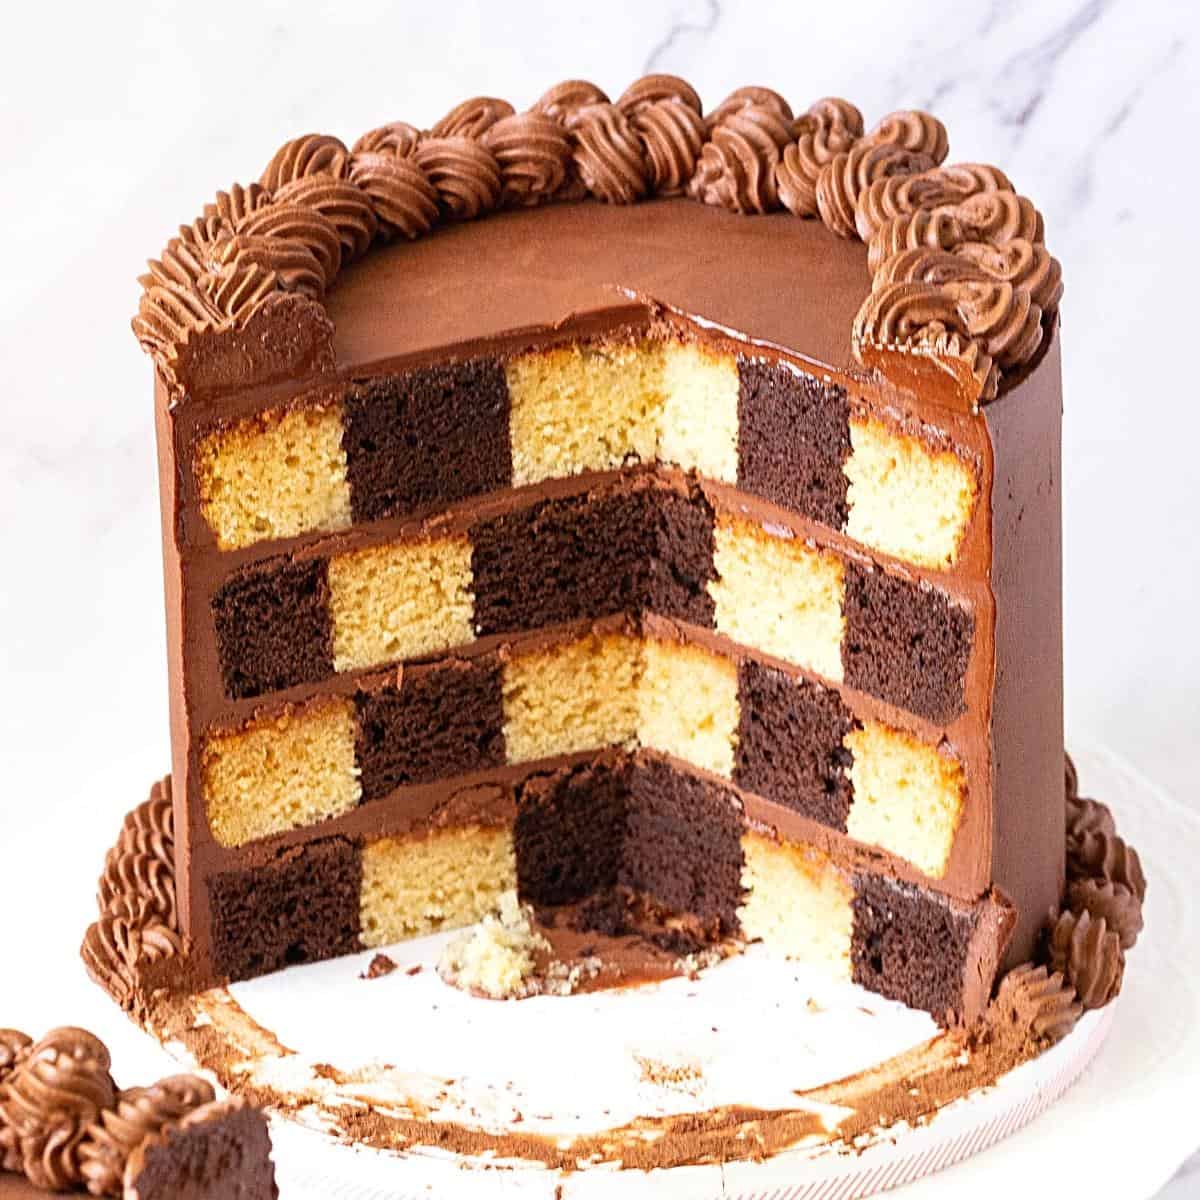 A sliced checkerboard cake on the table.